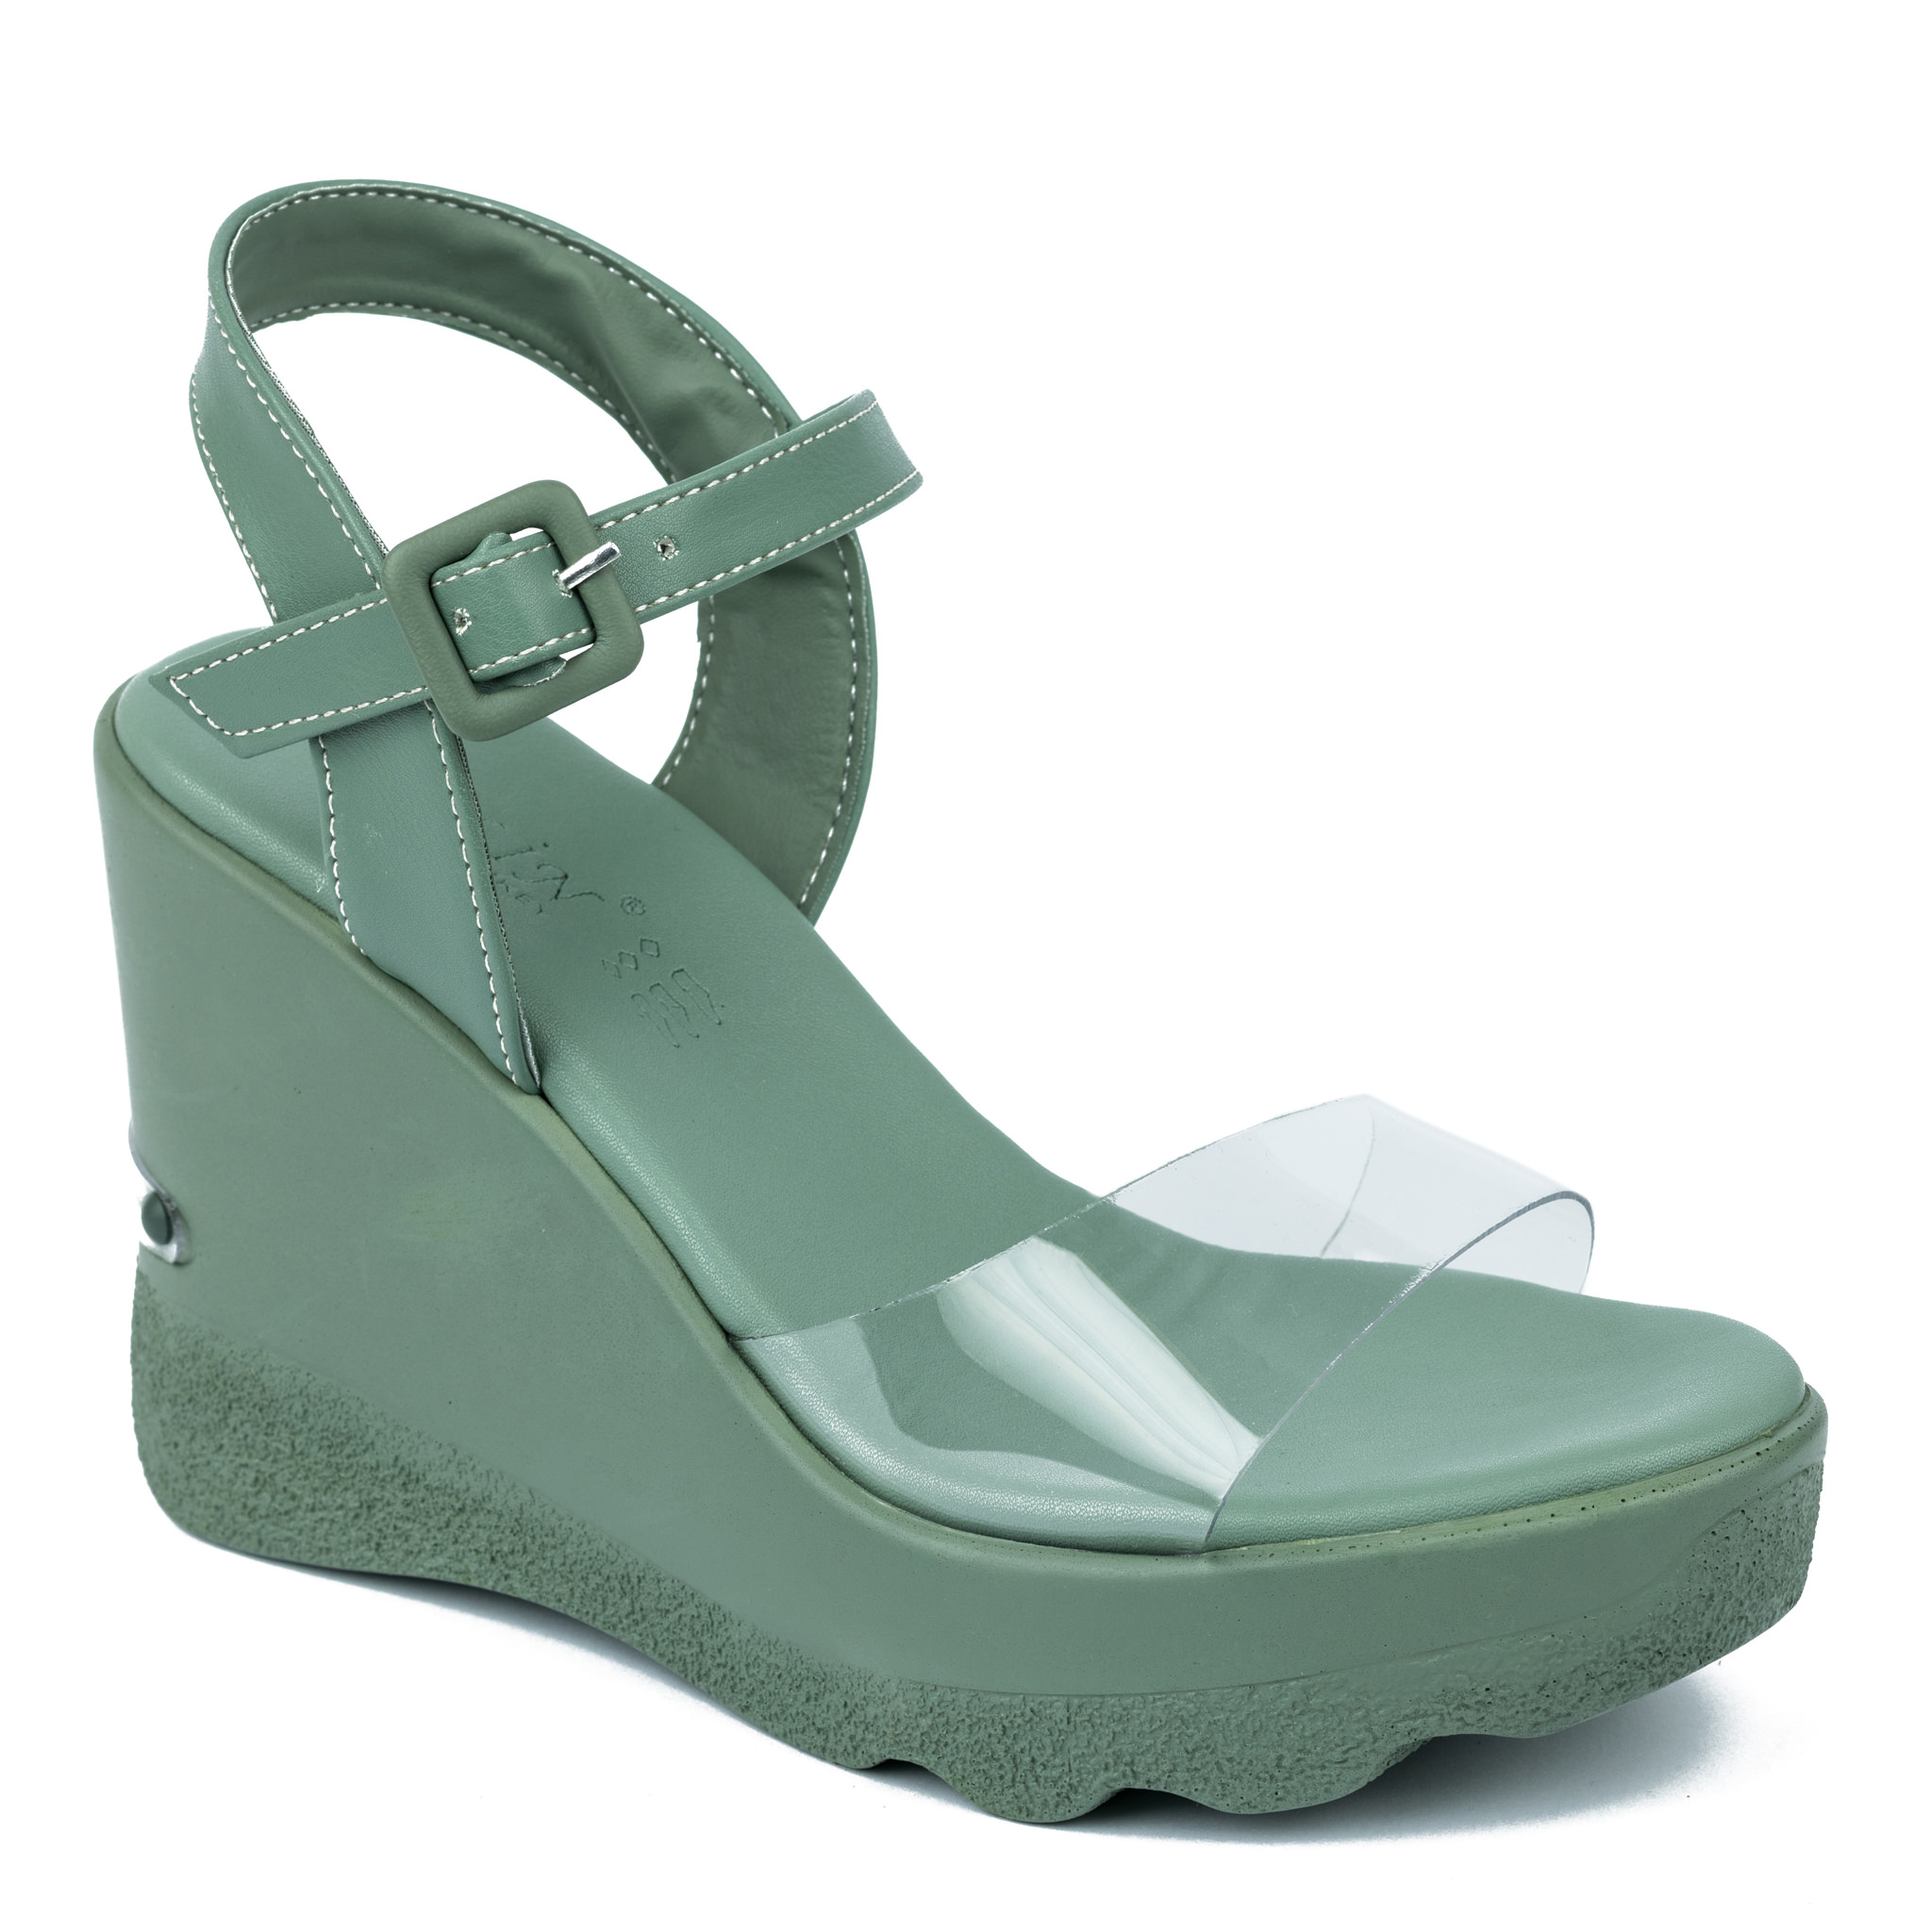 WEDGE SANDALS WITH TRANSPARENT BELT - GREEN